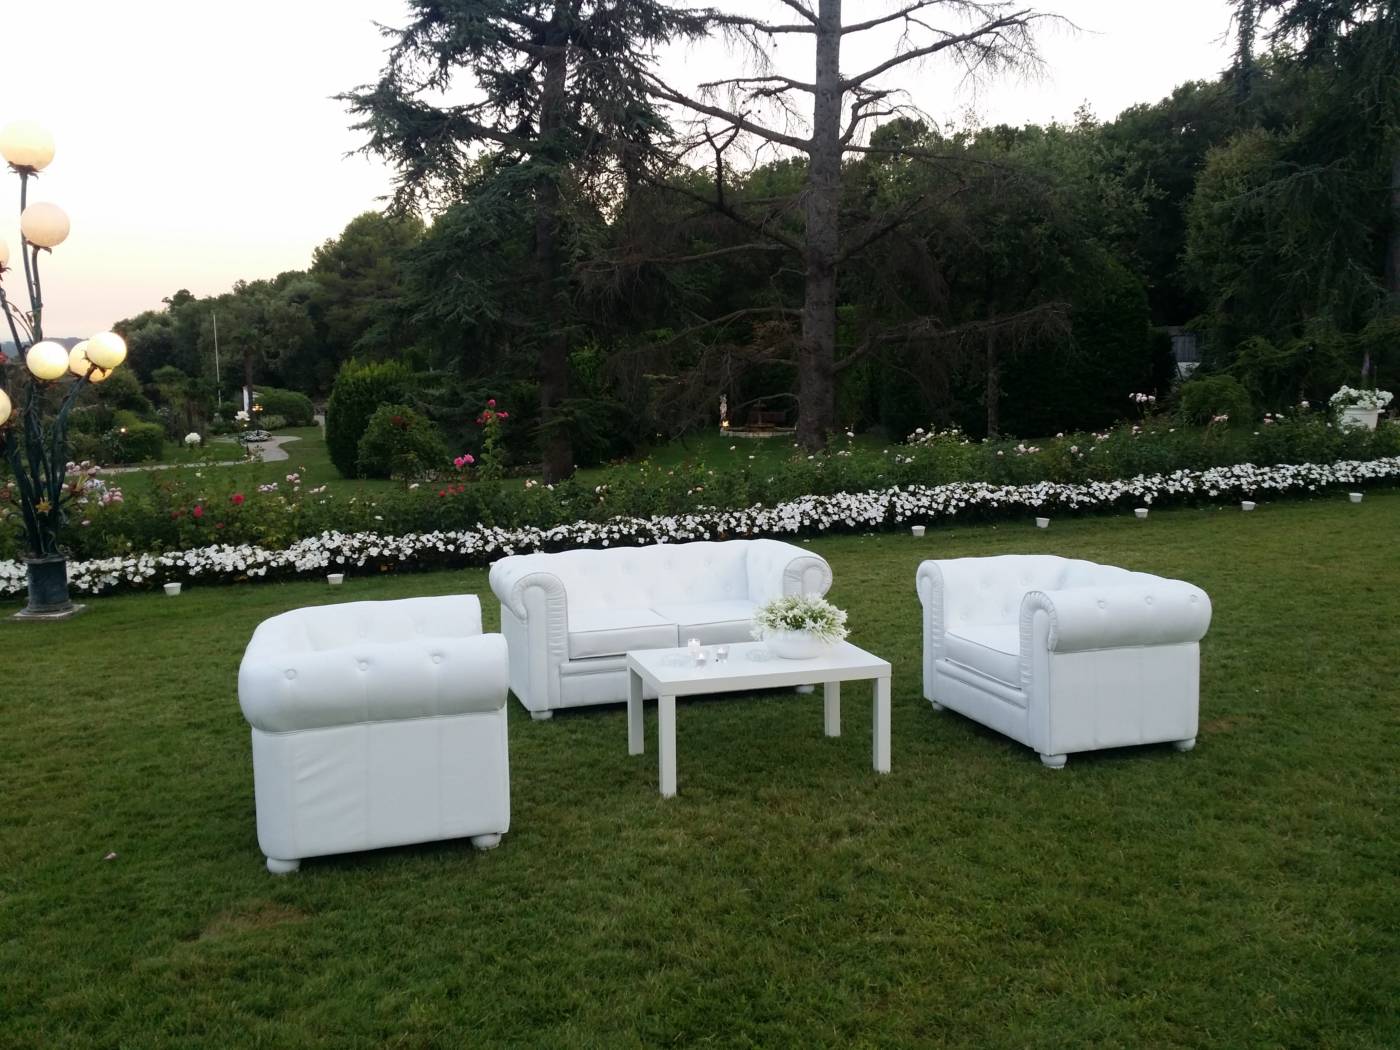 vente-location-mobilier-mariages-salons-canapes-chesterfield-04